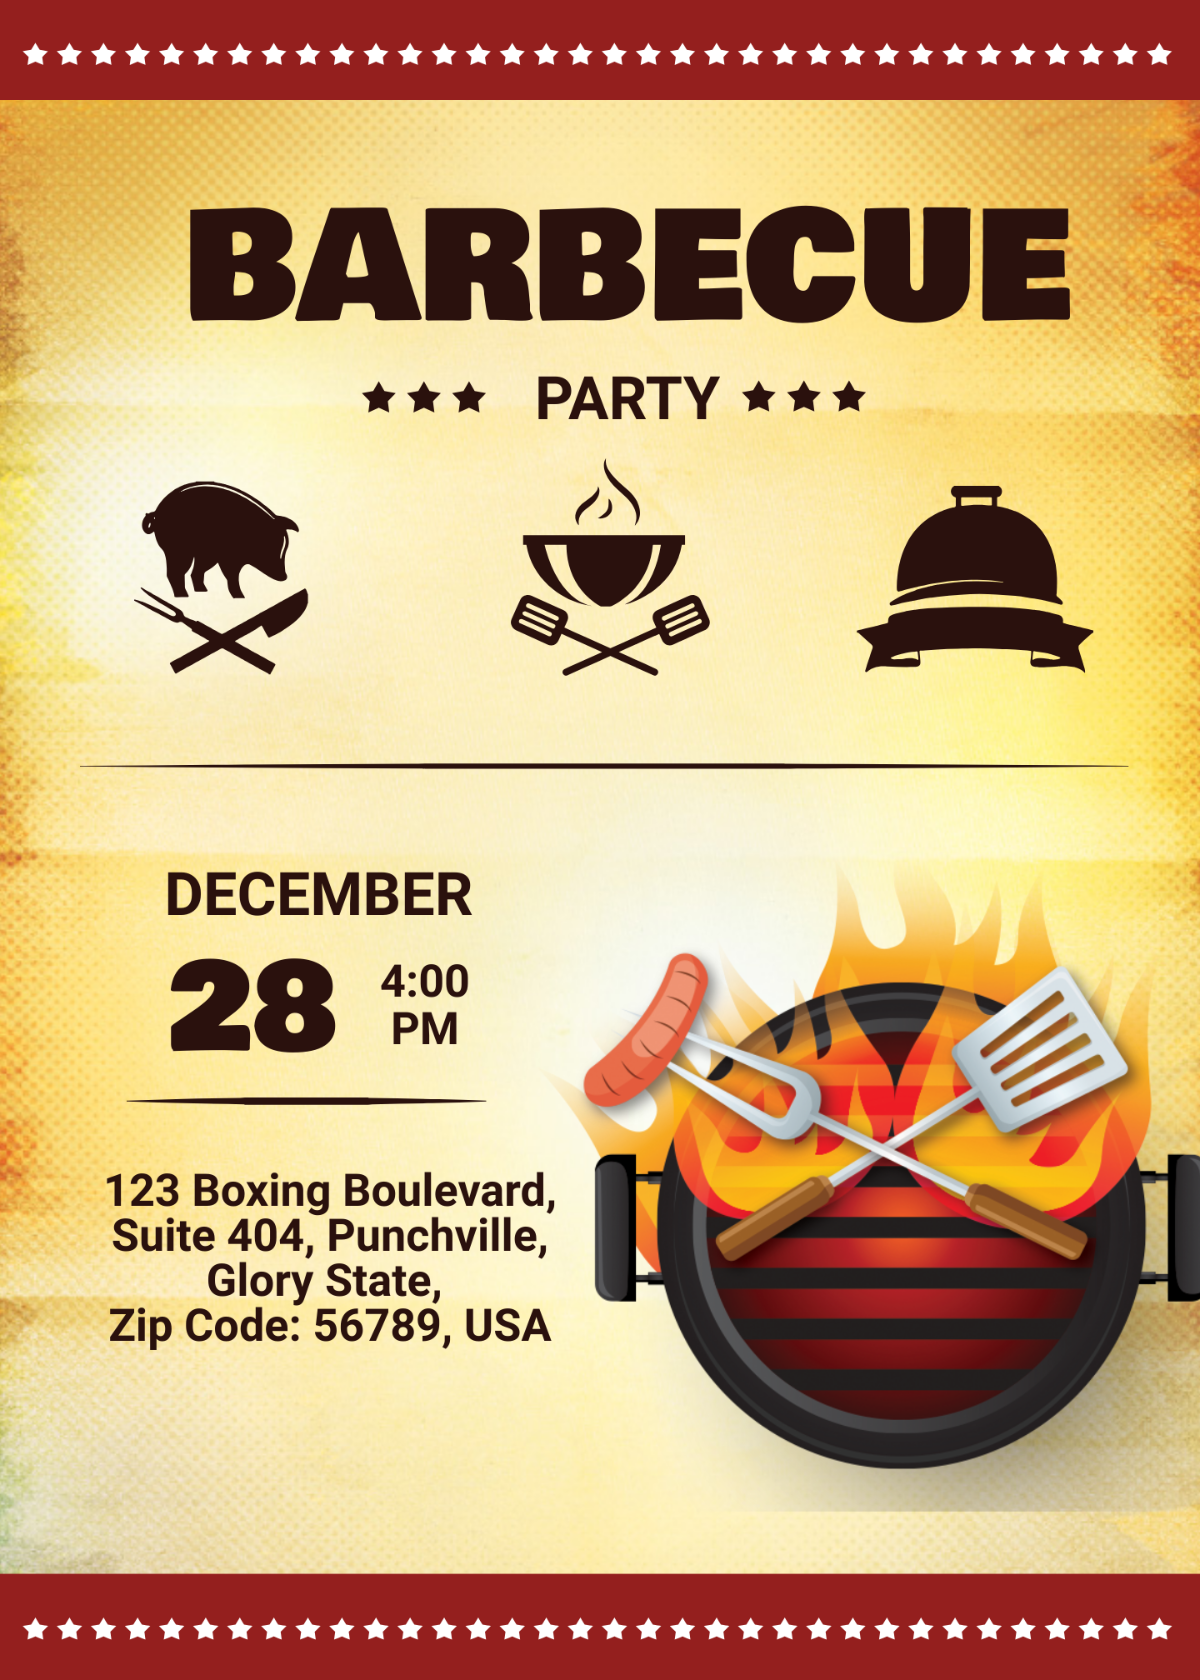 Awesome BBQ Party Invitation